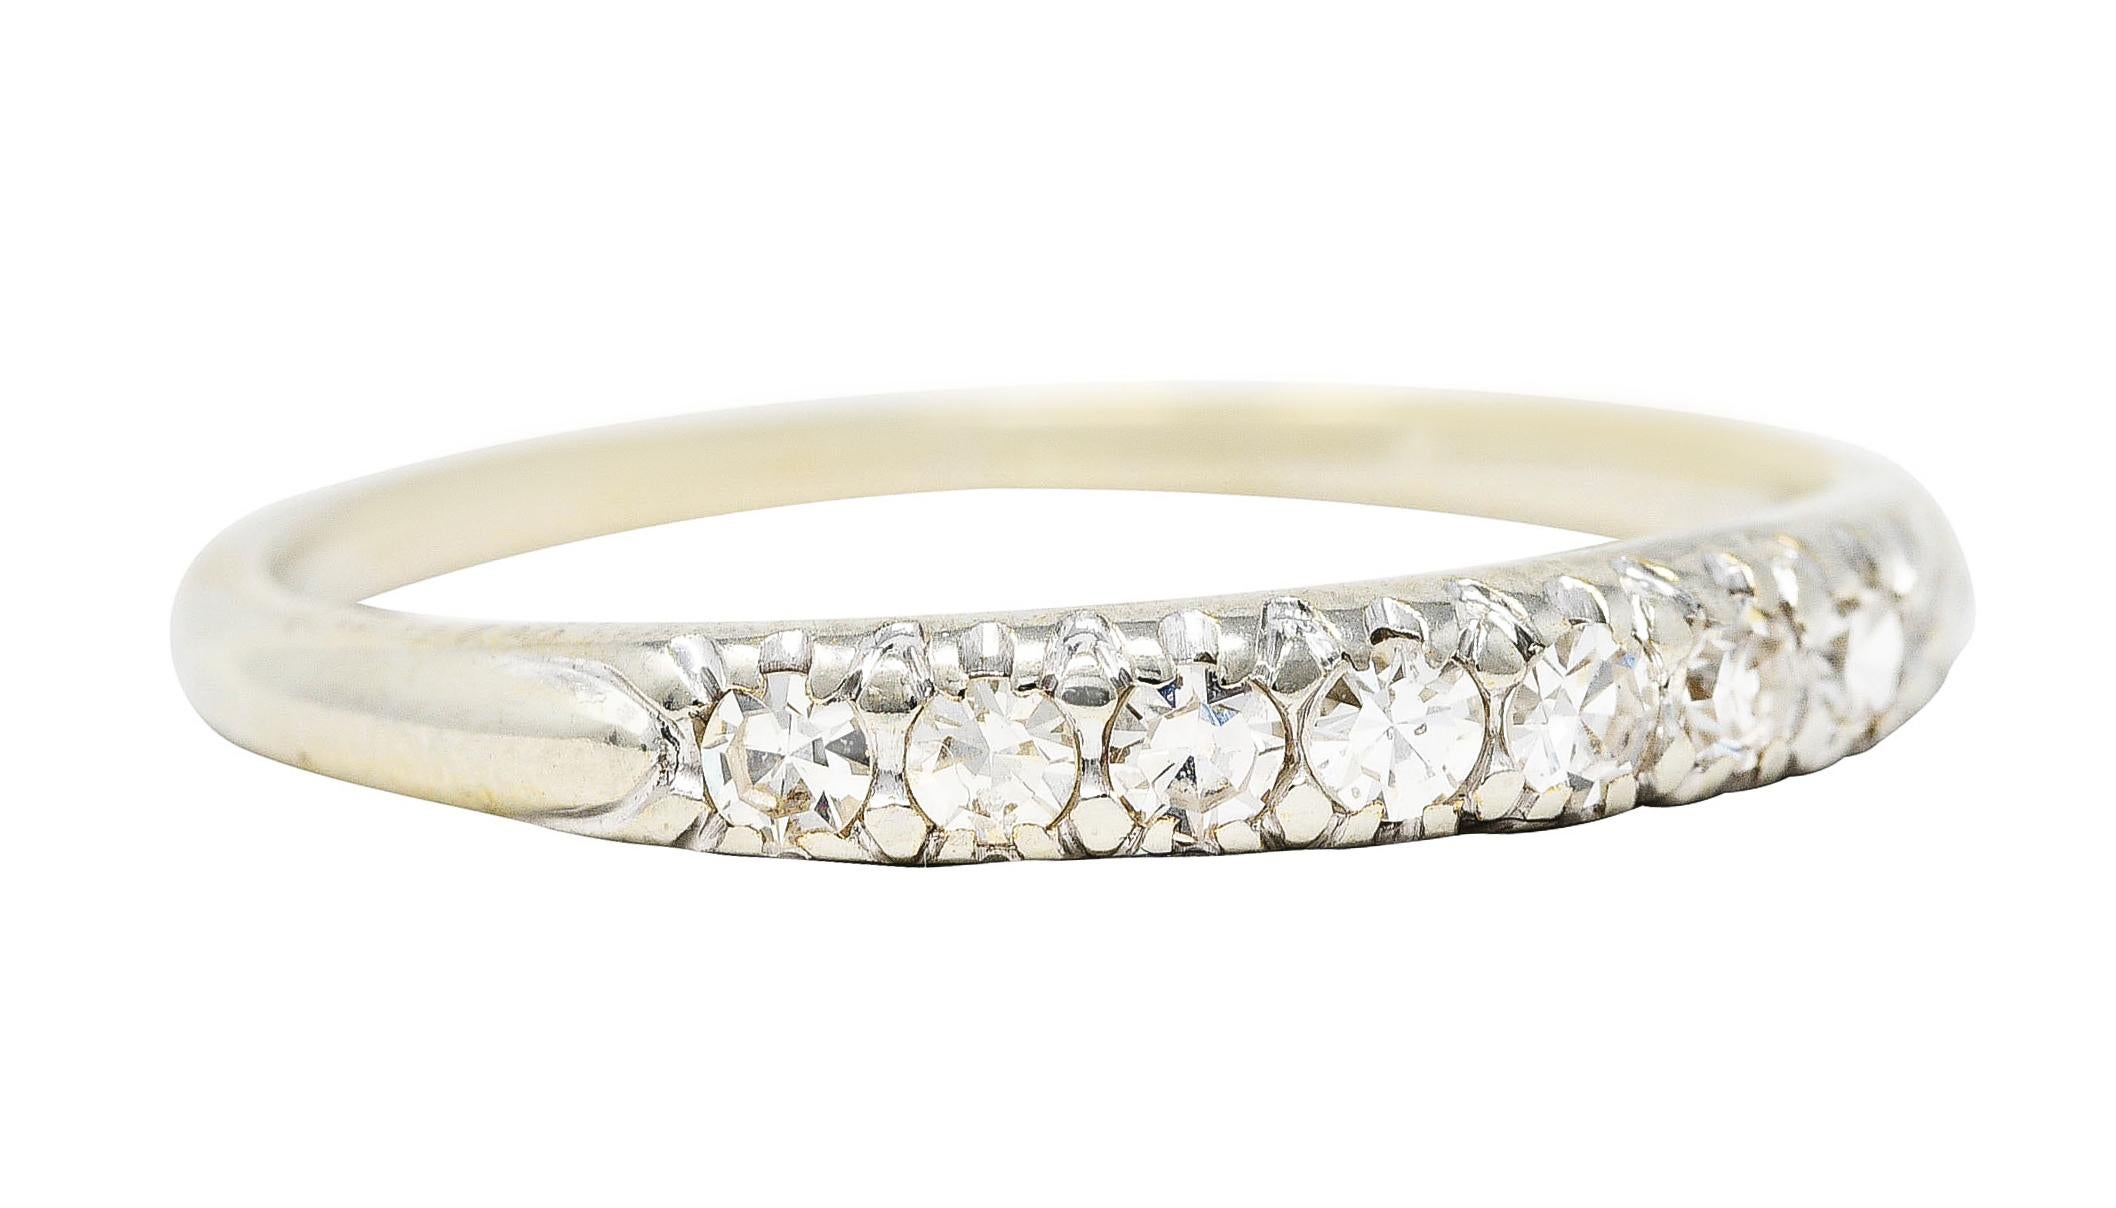 Band ring features a row of front facing single cut diamonds

Highly wrought and set low in band

While weighing in total approximately 0.25 carat - eye clean and bright

Stamped 18K for 18 karat gold

Fully signed Jabel

Circa: 1930s

Ring Size: 5